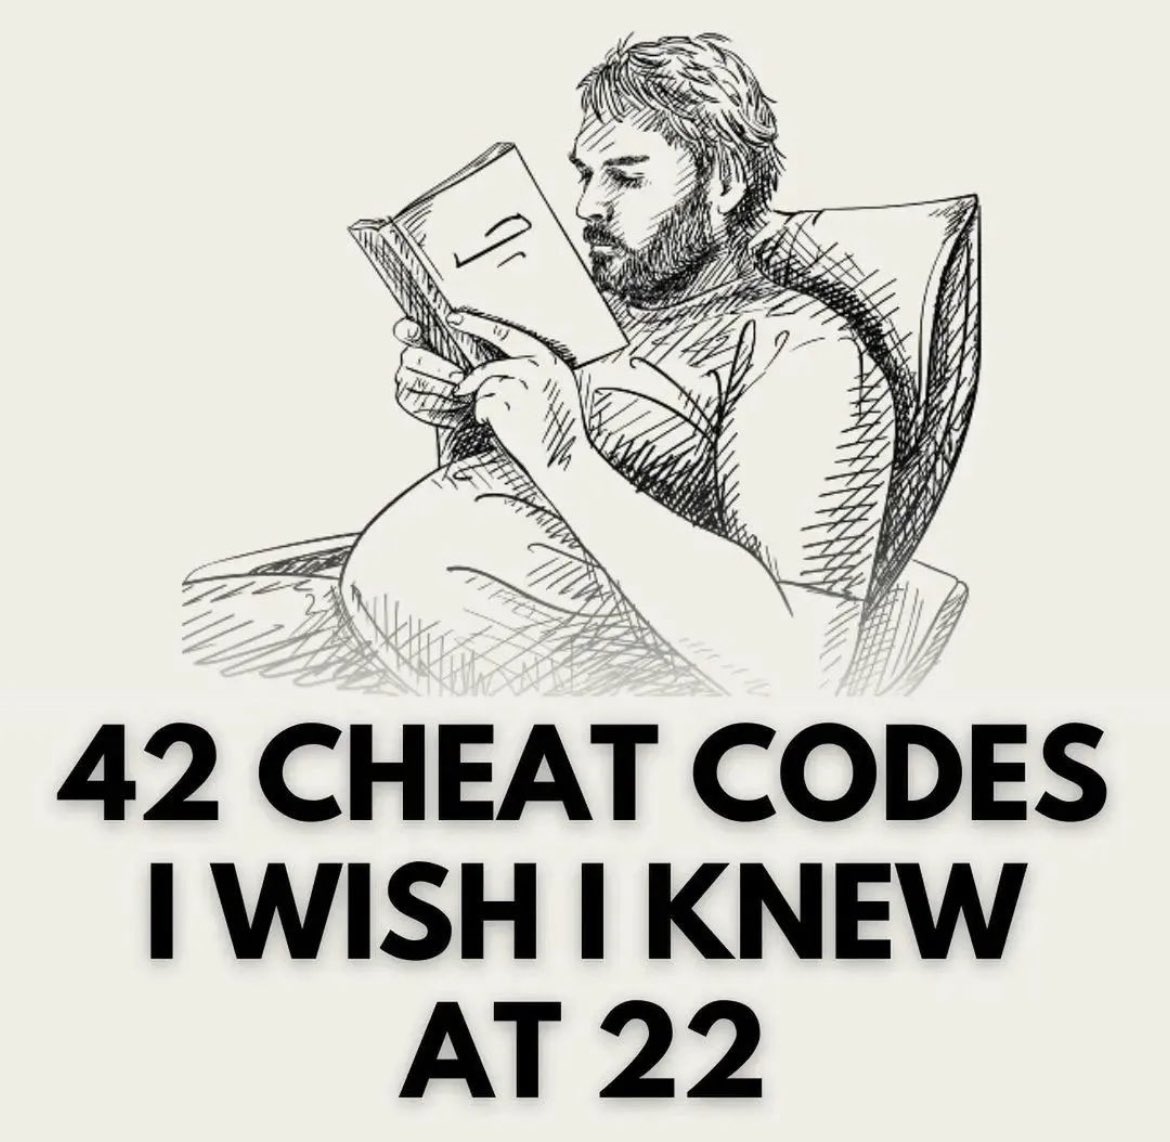 42 cheat codes you’ll be thankful you know: